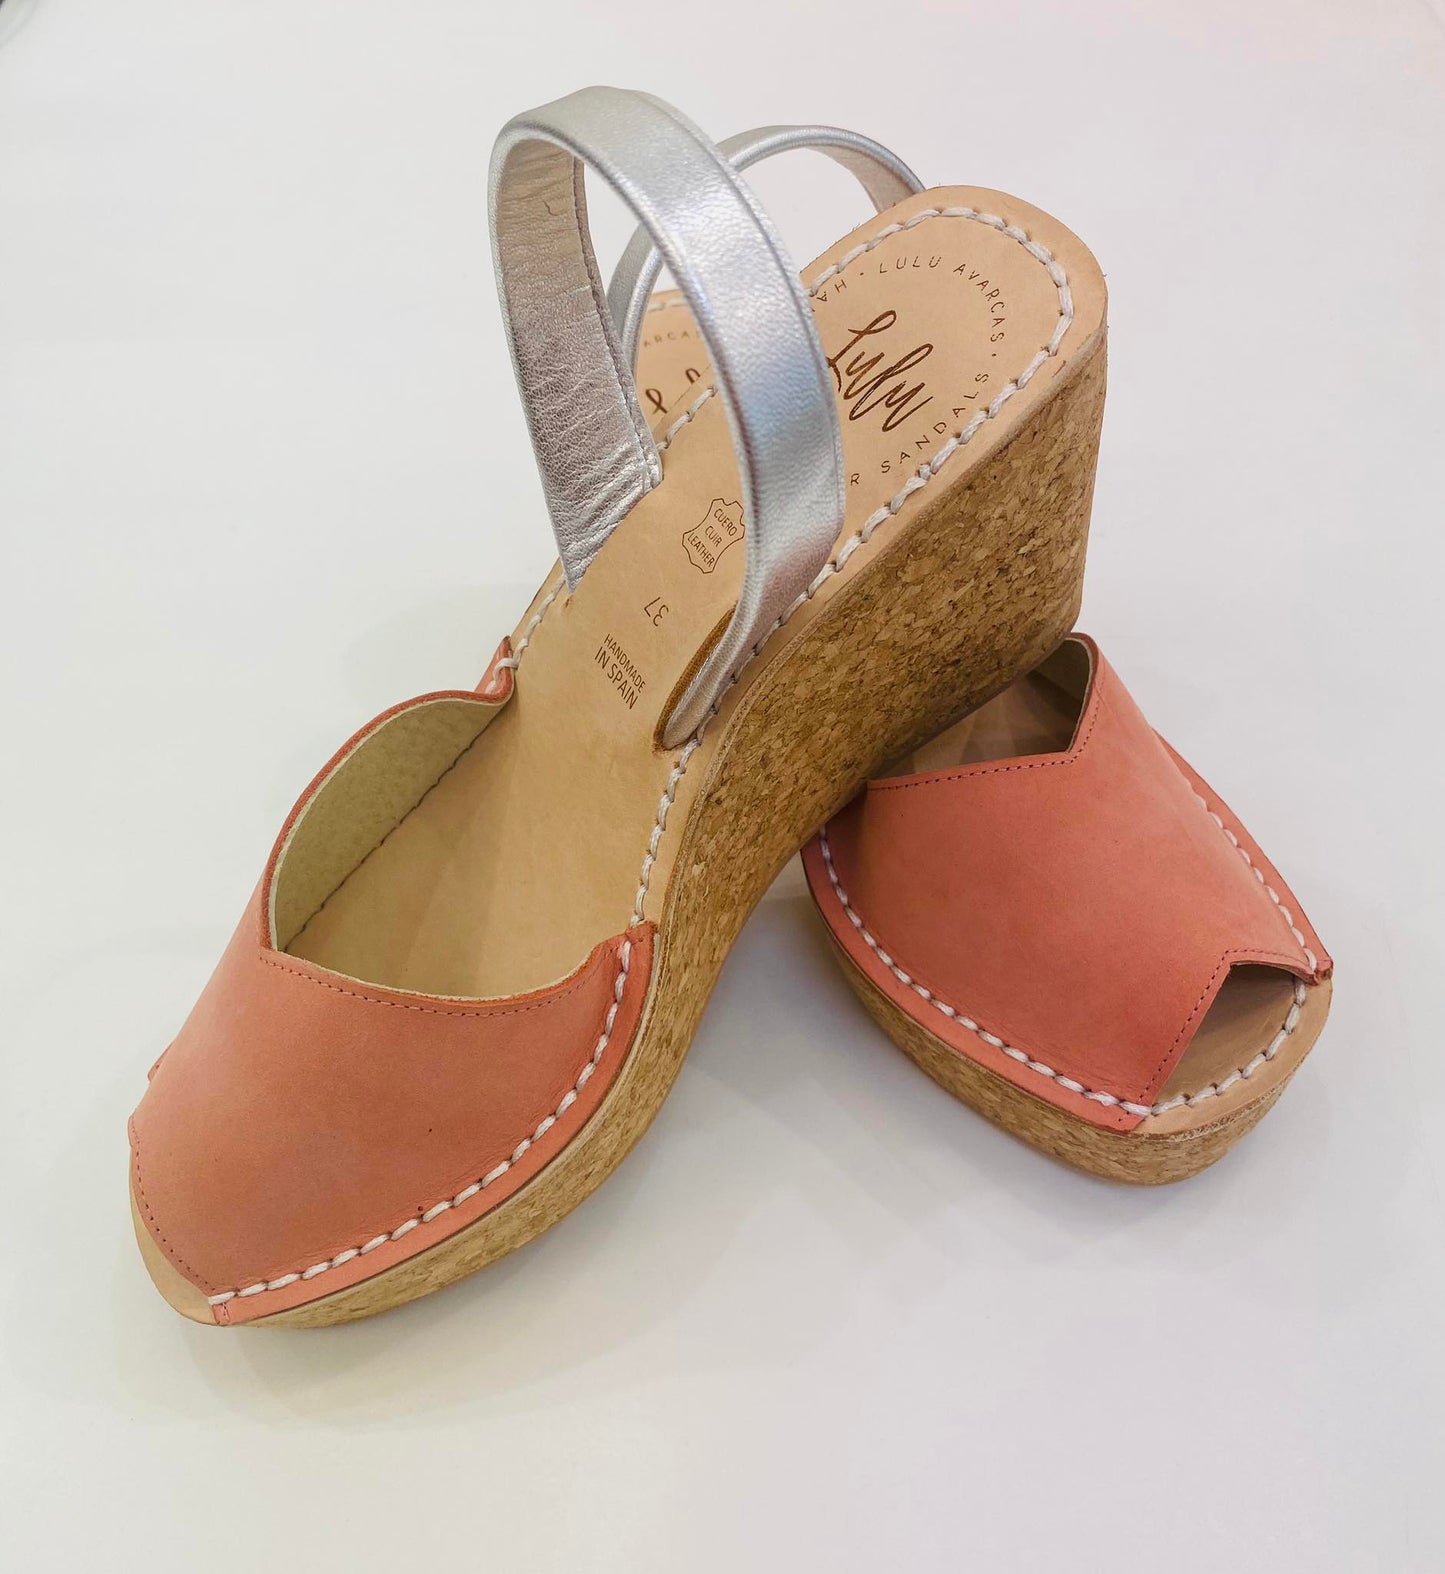 LULU AVARCAS LEATHER CORKS IN SALMON AND SILVER